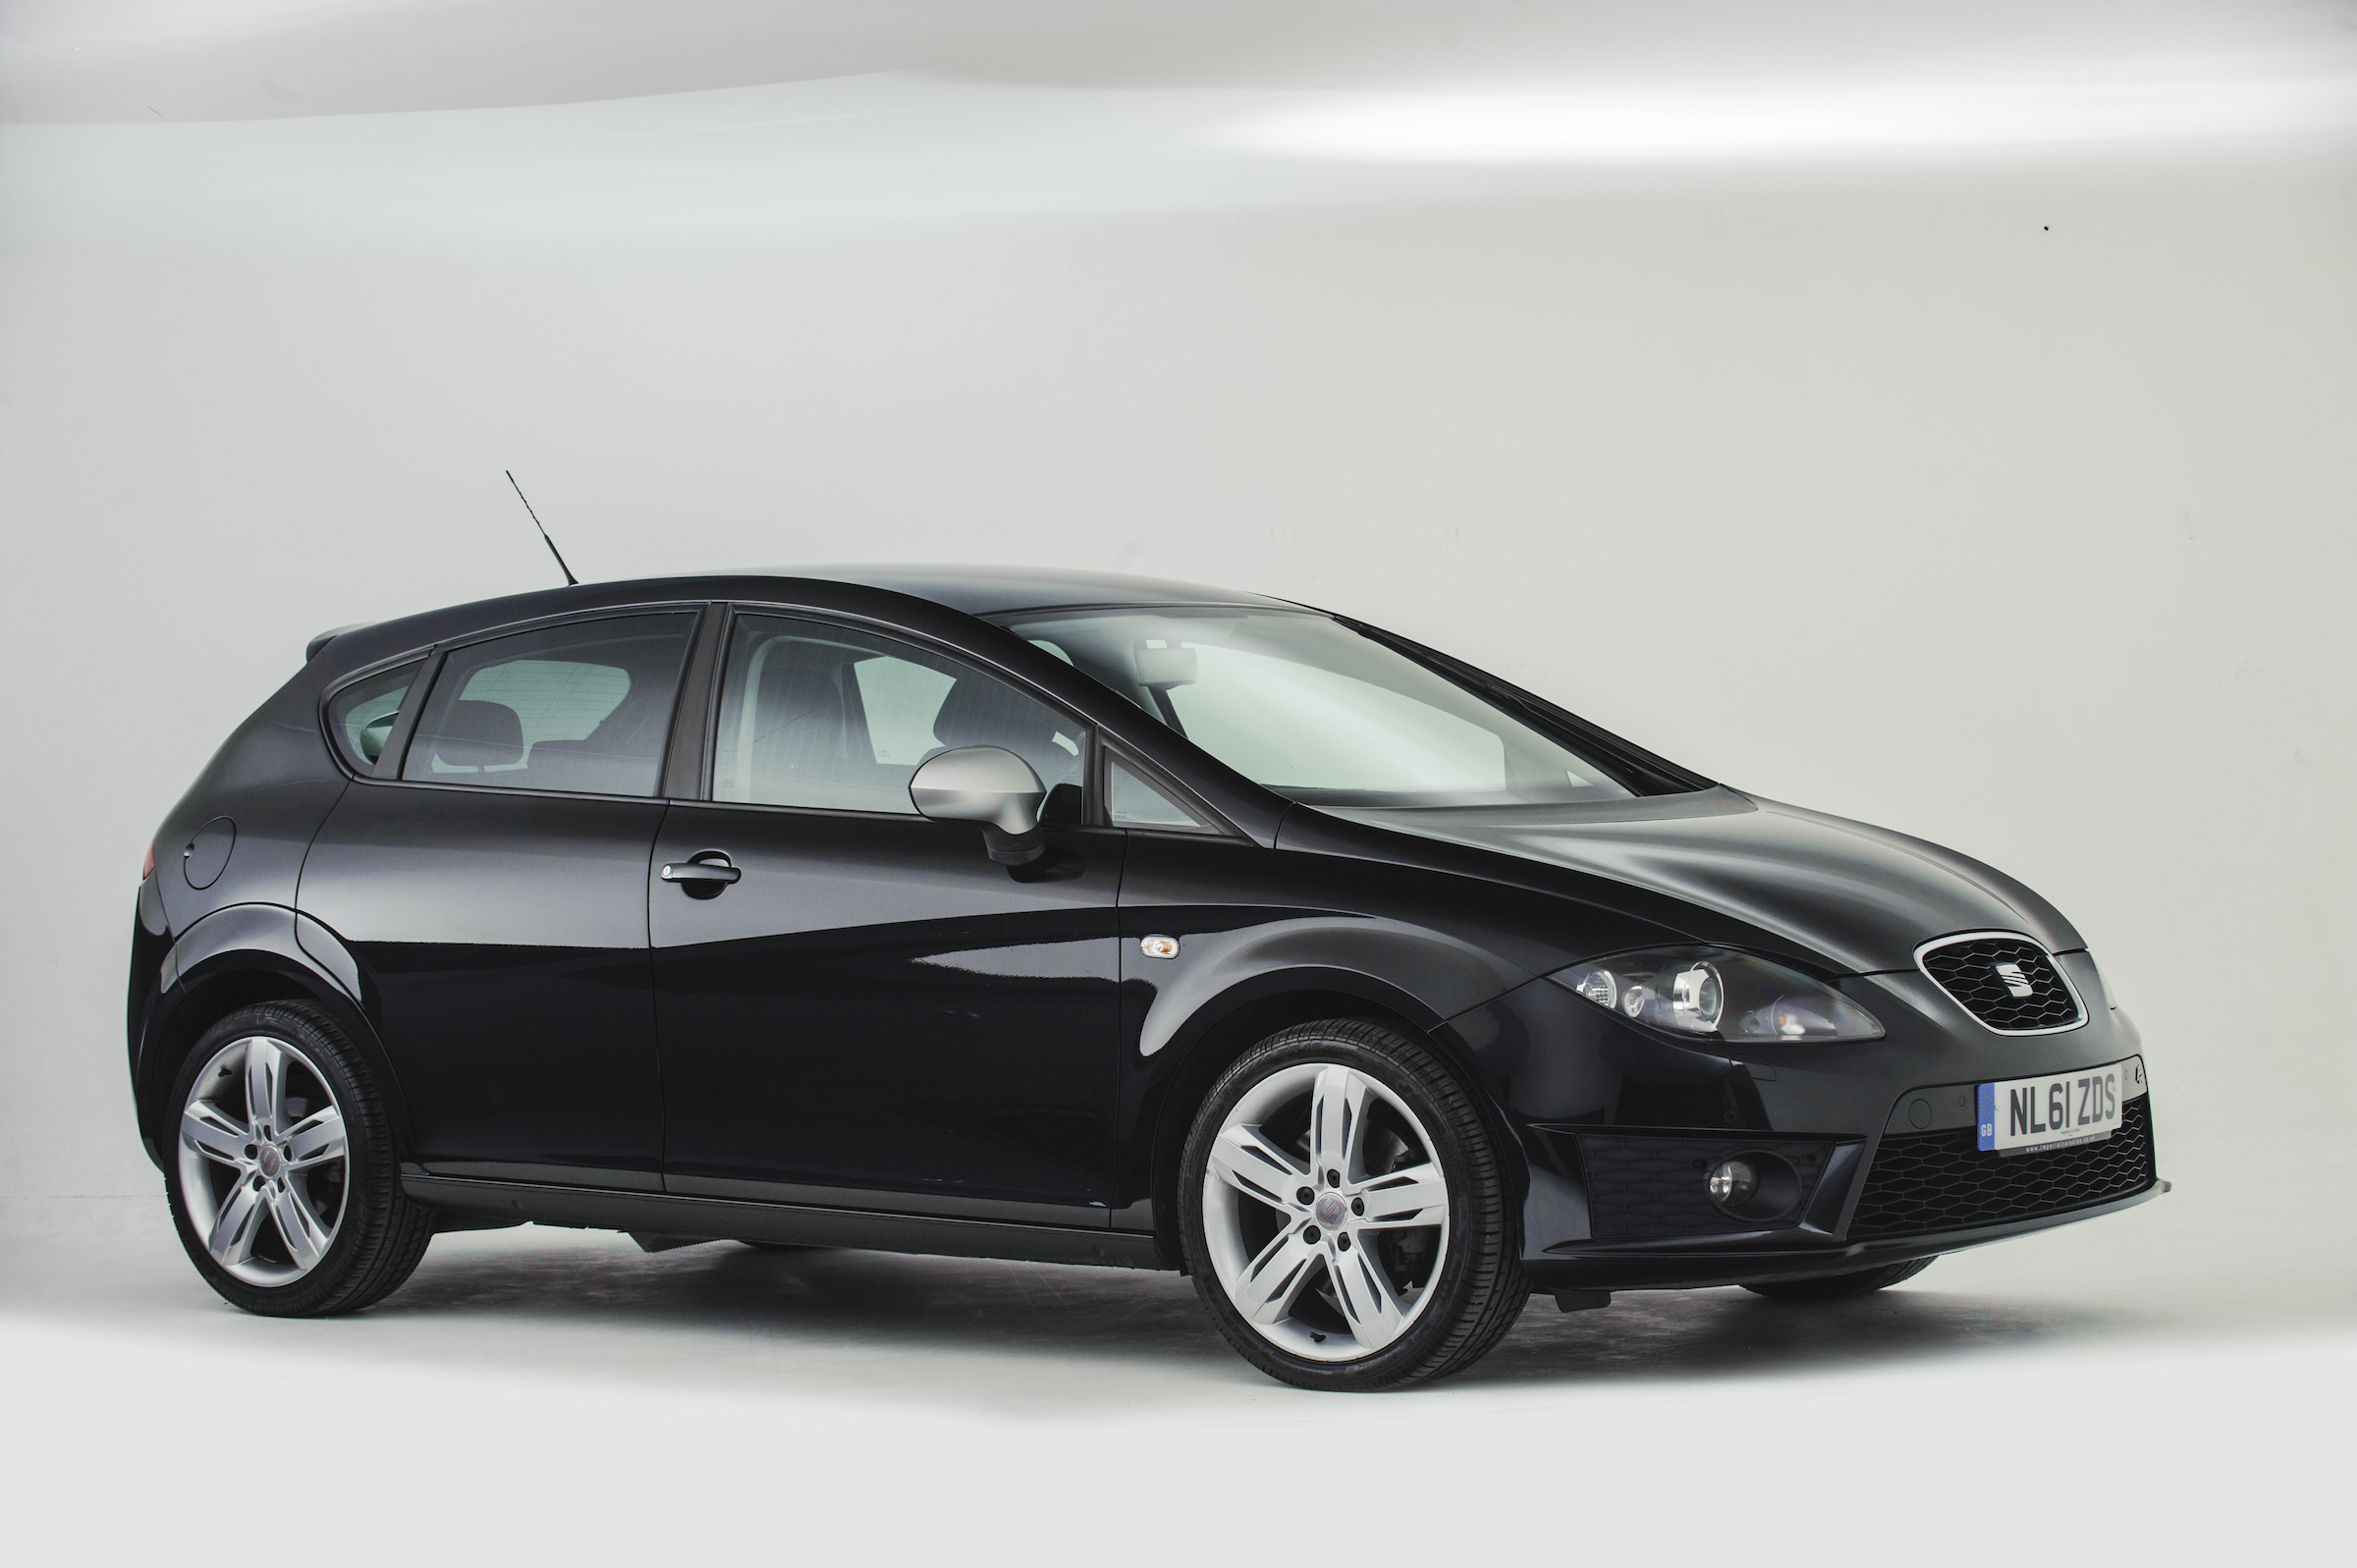 Used SEAT Leon buying guide: 2005-2013 (Mk2)